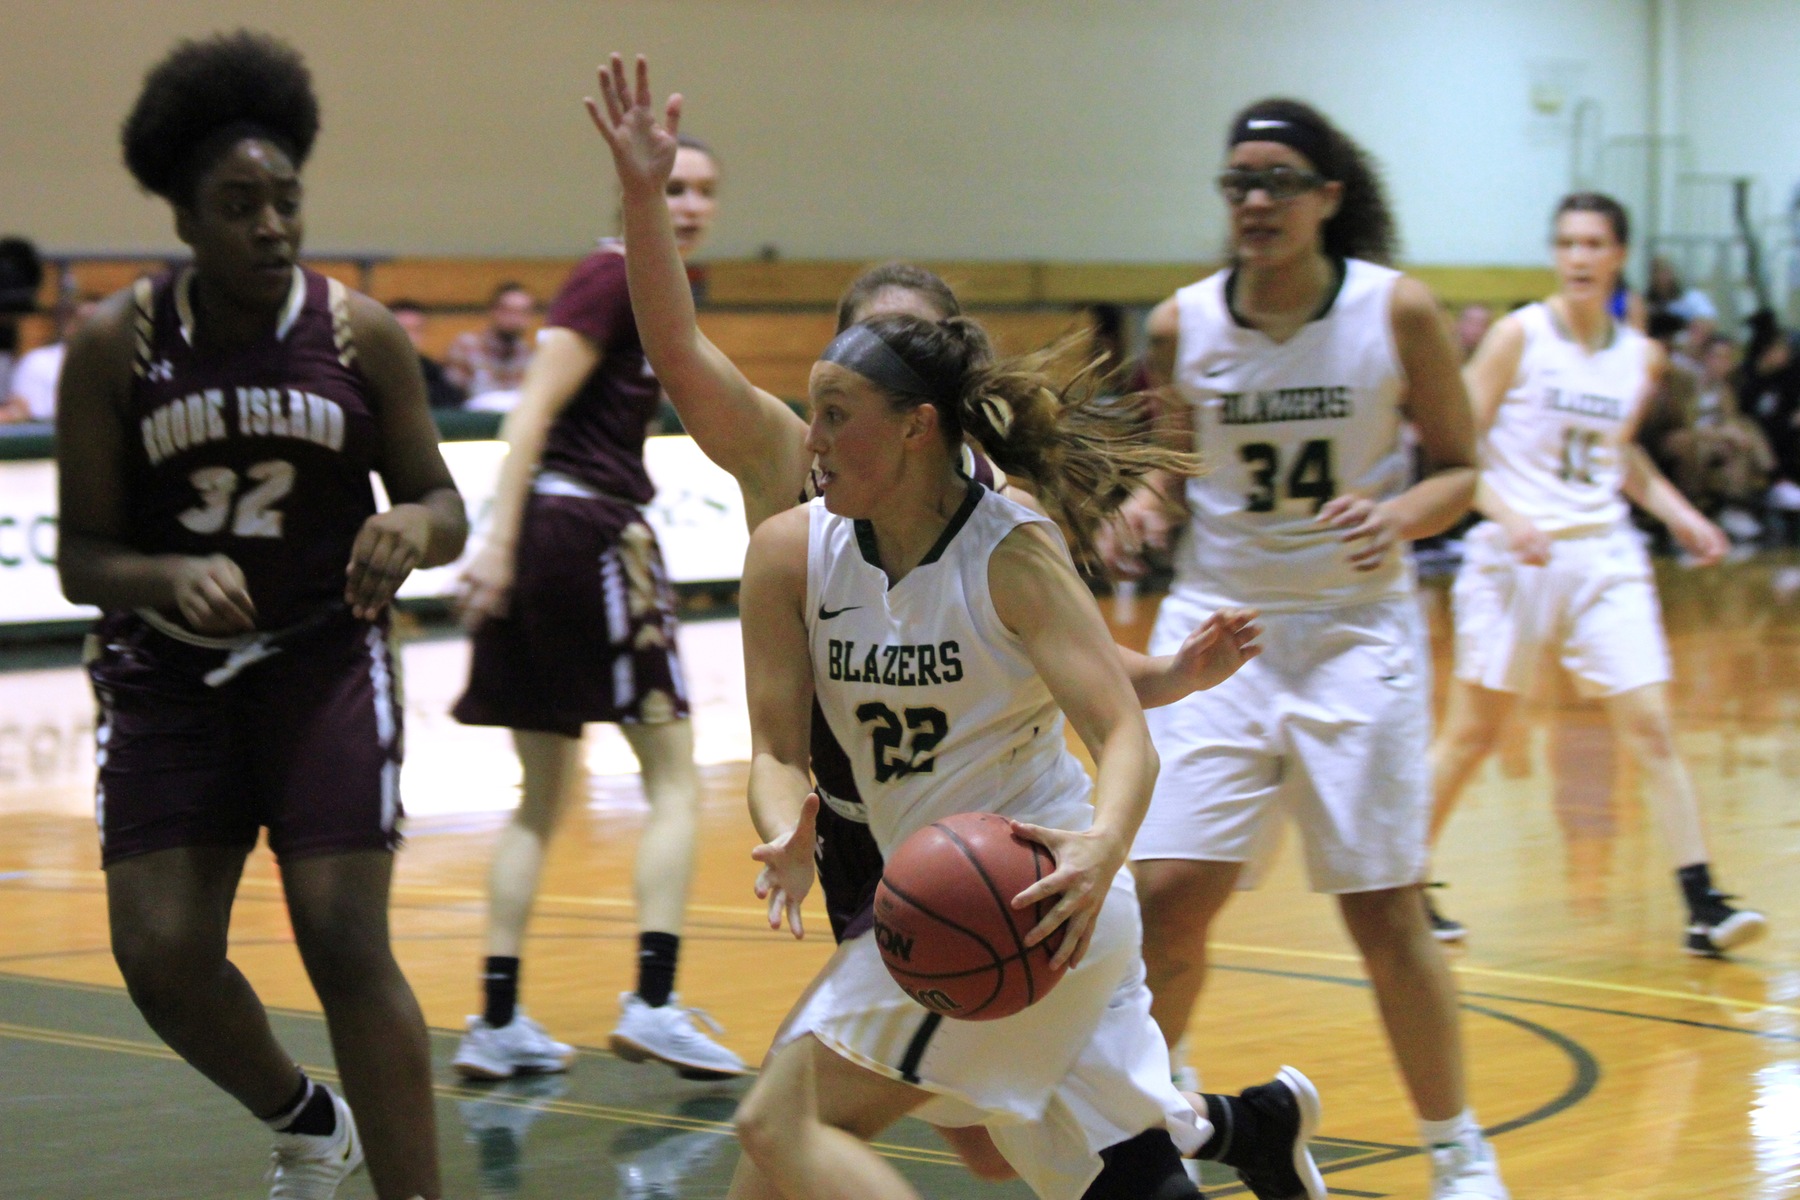 Peguero-Flores Scores Career-High 23 But Blazers Come Up Short At Lasell